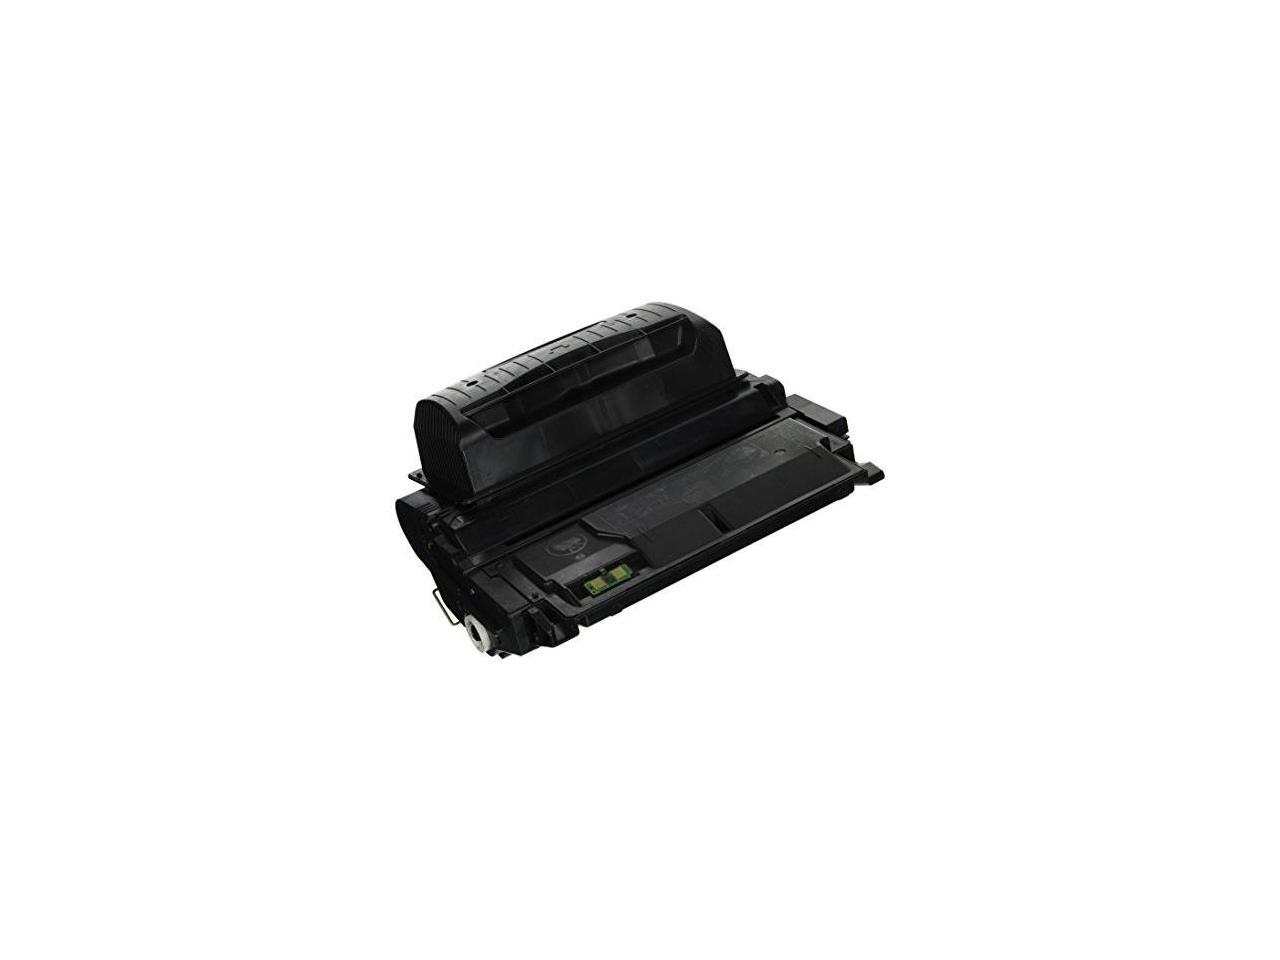 WEST POINT PRODUCTS 200001P Toner Cartridge 20000 Page Y ield Black - image 3 of 3